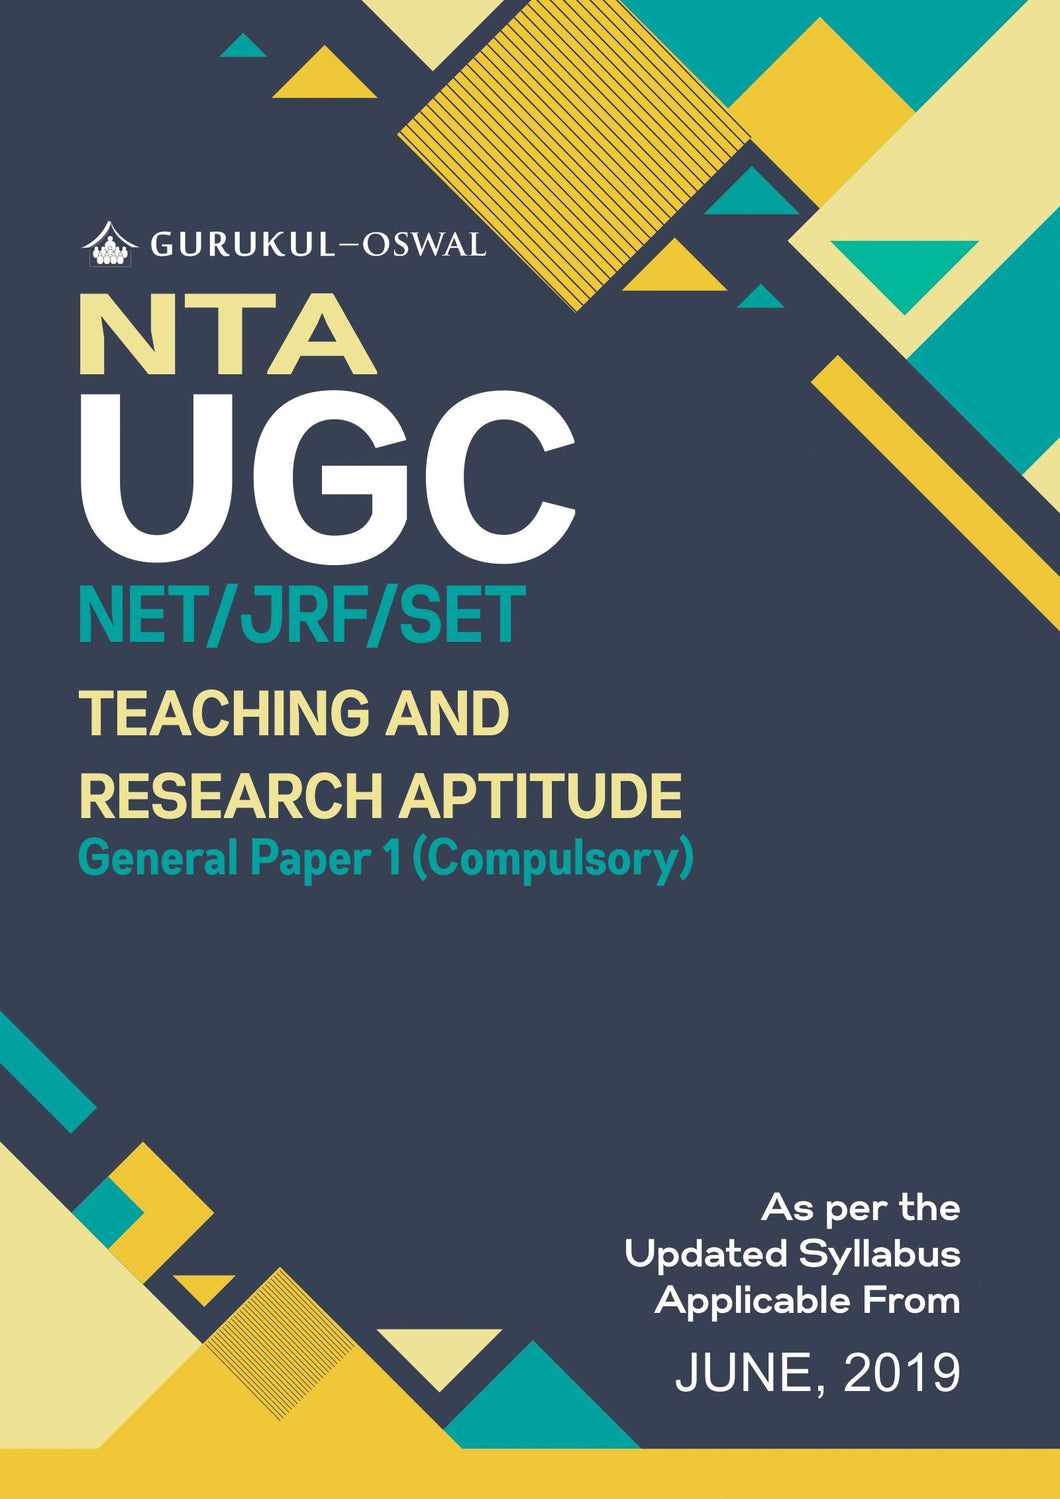 Oswal UGC NET General Paper 1: Teaching and Research Aptitude for NET JRF SET